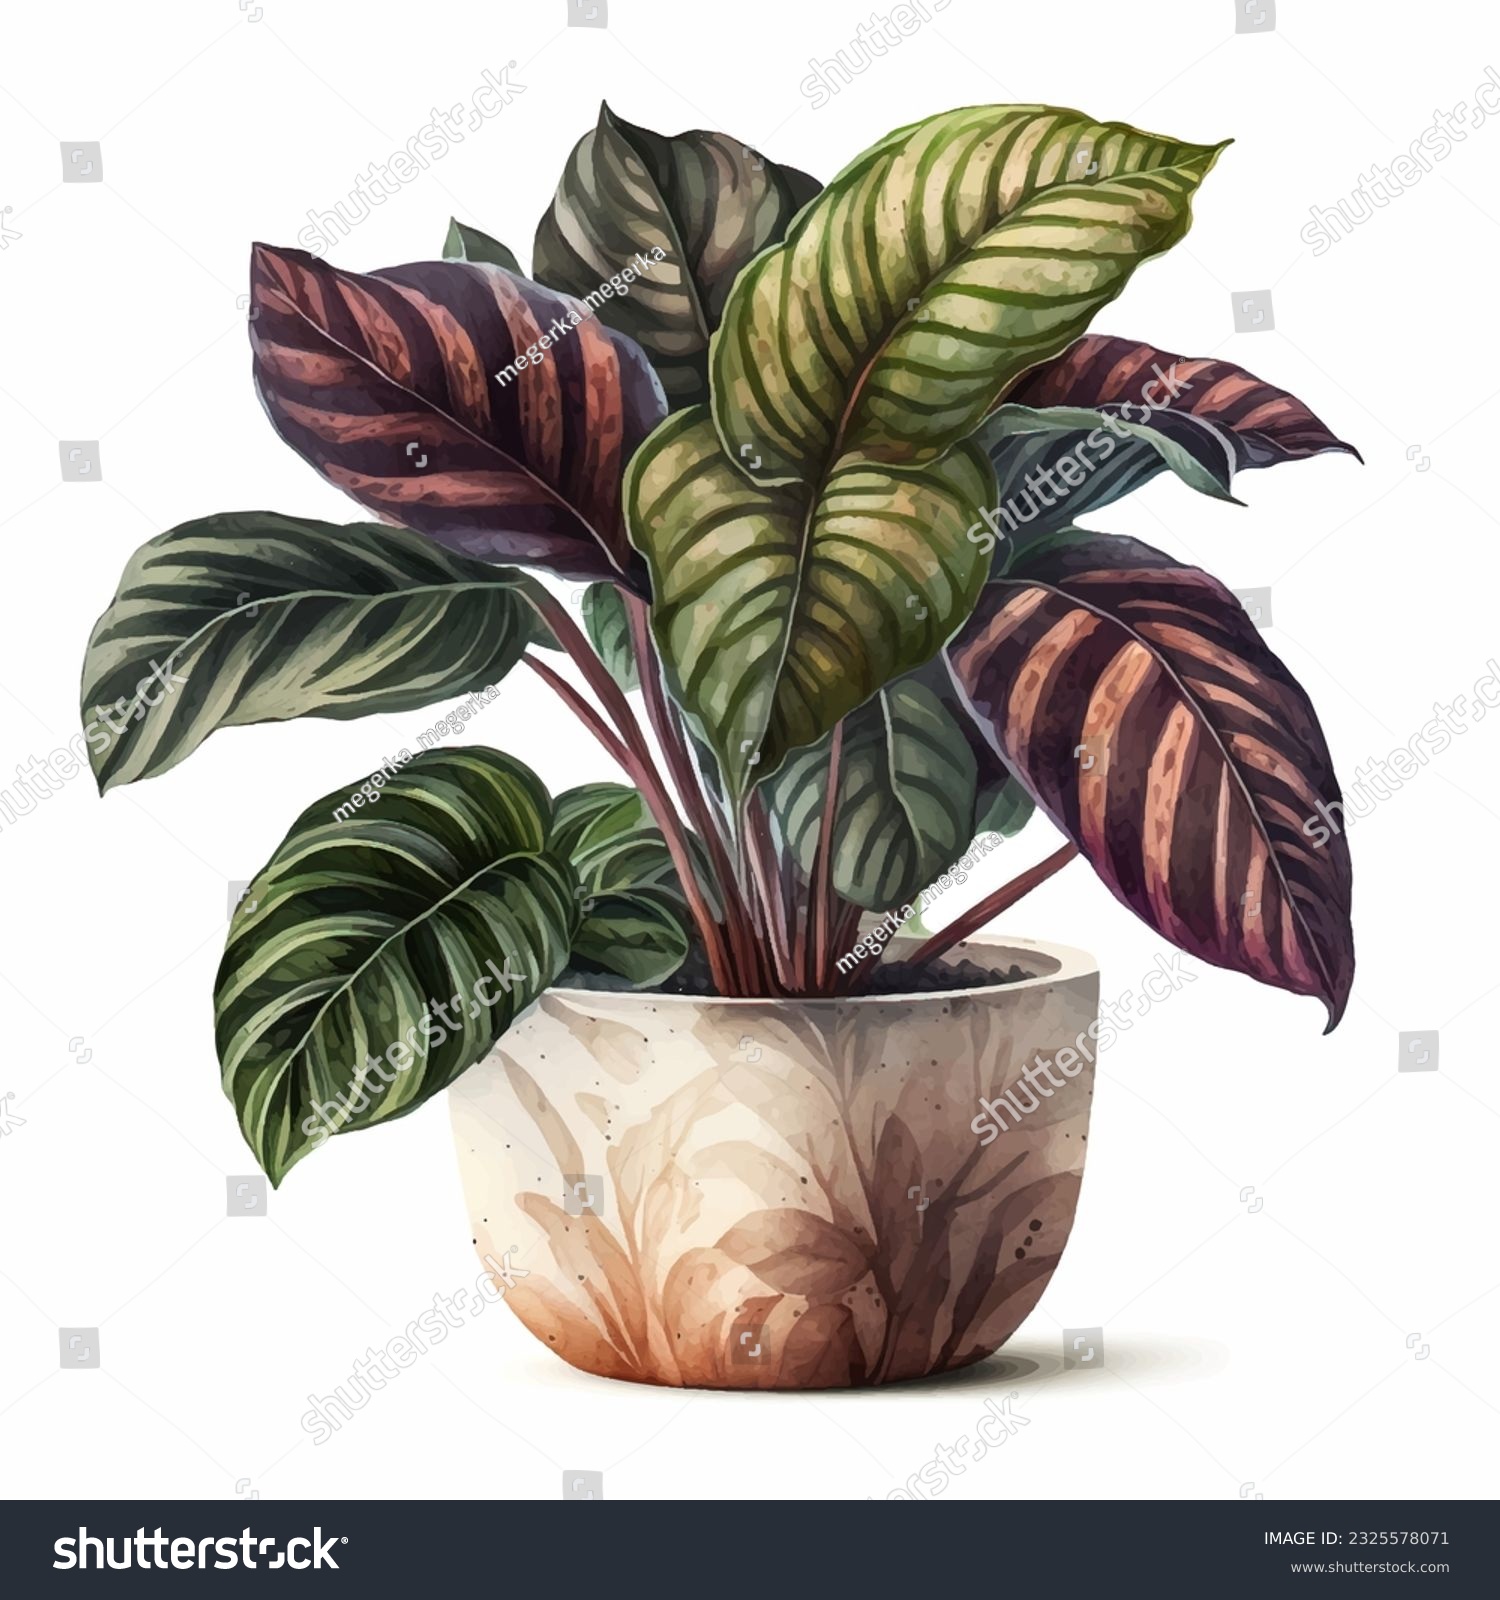 Watercolor calathea orbifolia. Drawing of a plant in a pot with leaves. Watercolor illustration on white #2325578071